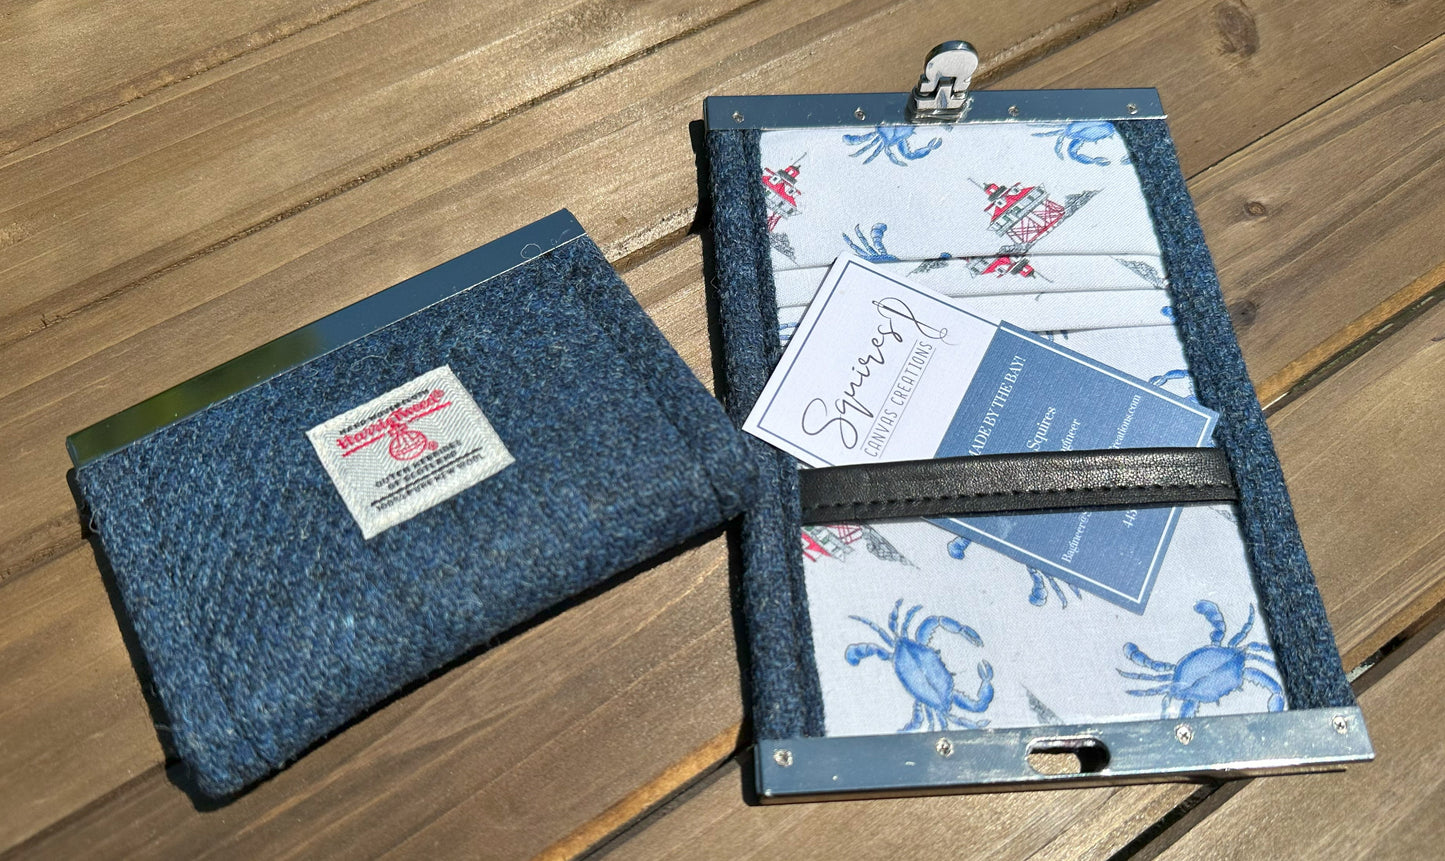 Blue Harris Tweed® with Vintage Crab & Lighthouse Interior and Nickle Flip-Lock City Dock Wallet squirescanvascreations.com